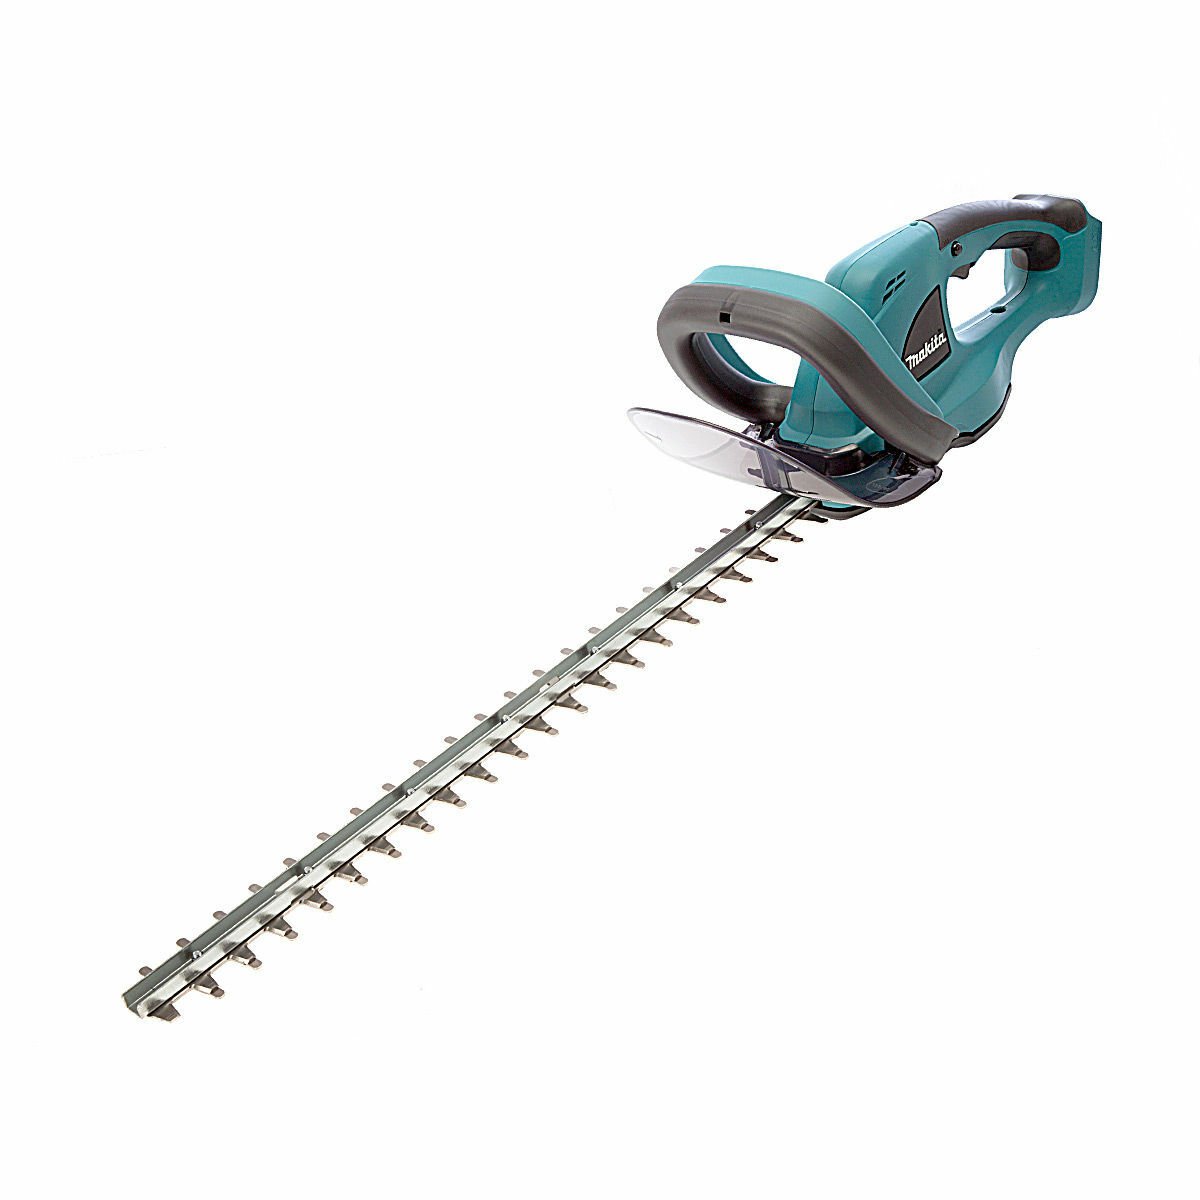 Image of Makita <br><strong>DUH523Z 18V Hedge Trimmer</strong>